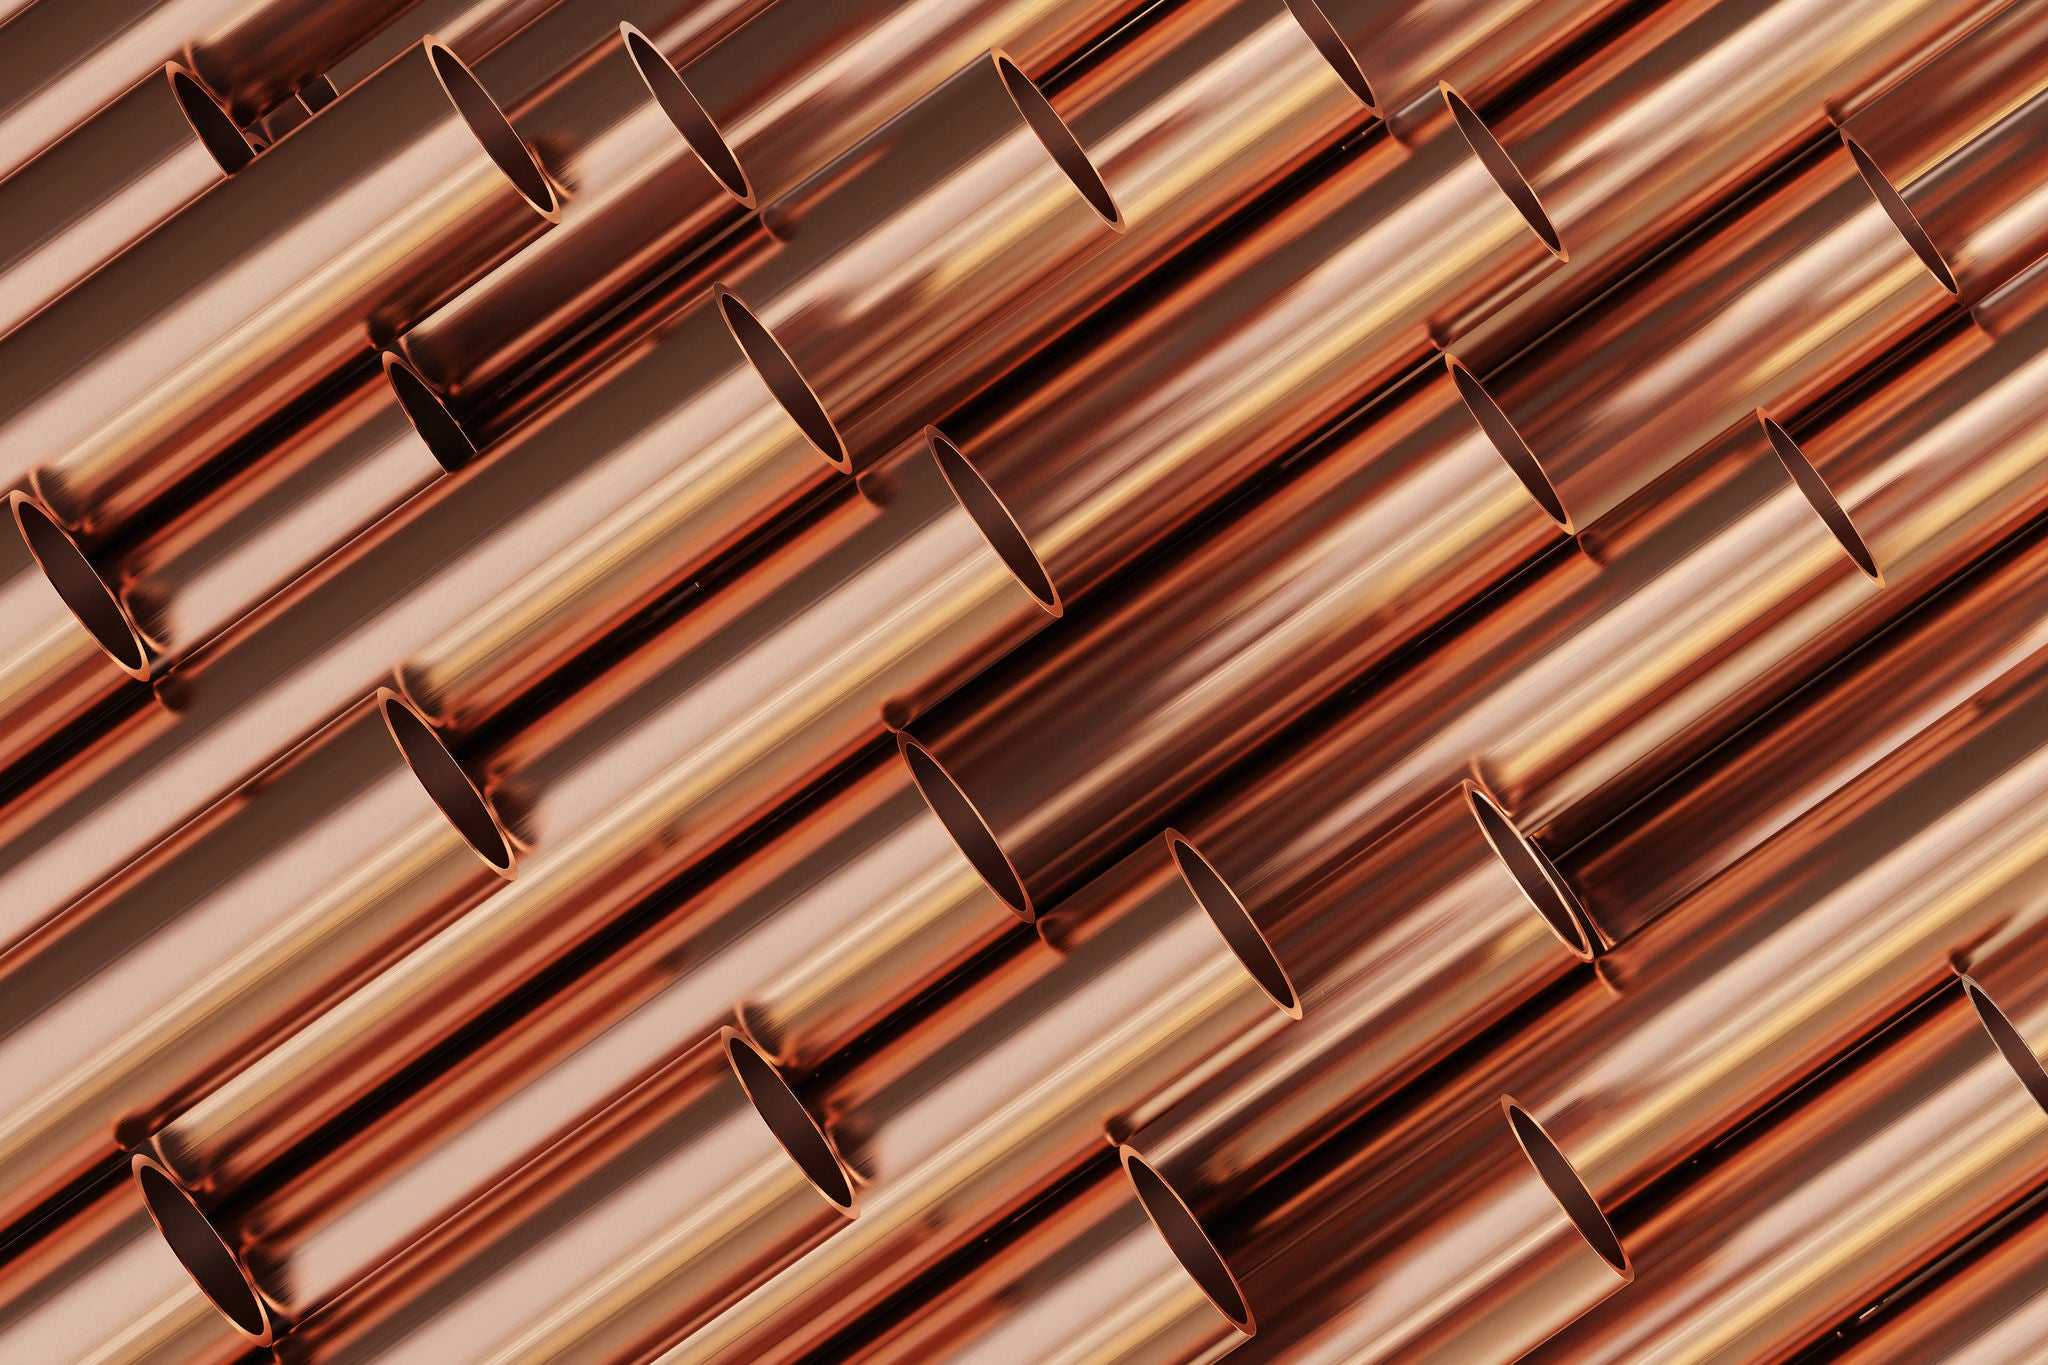 ey a meticulously arranged copper metal tube